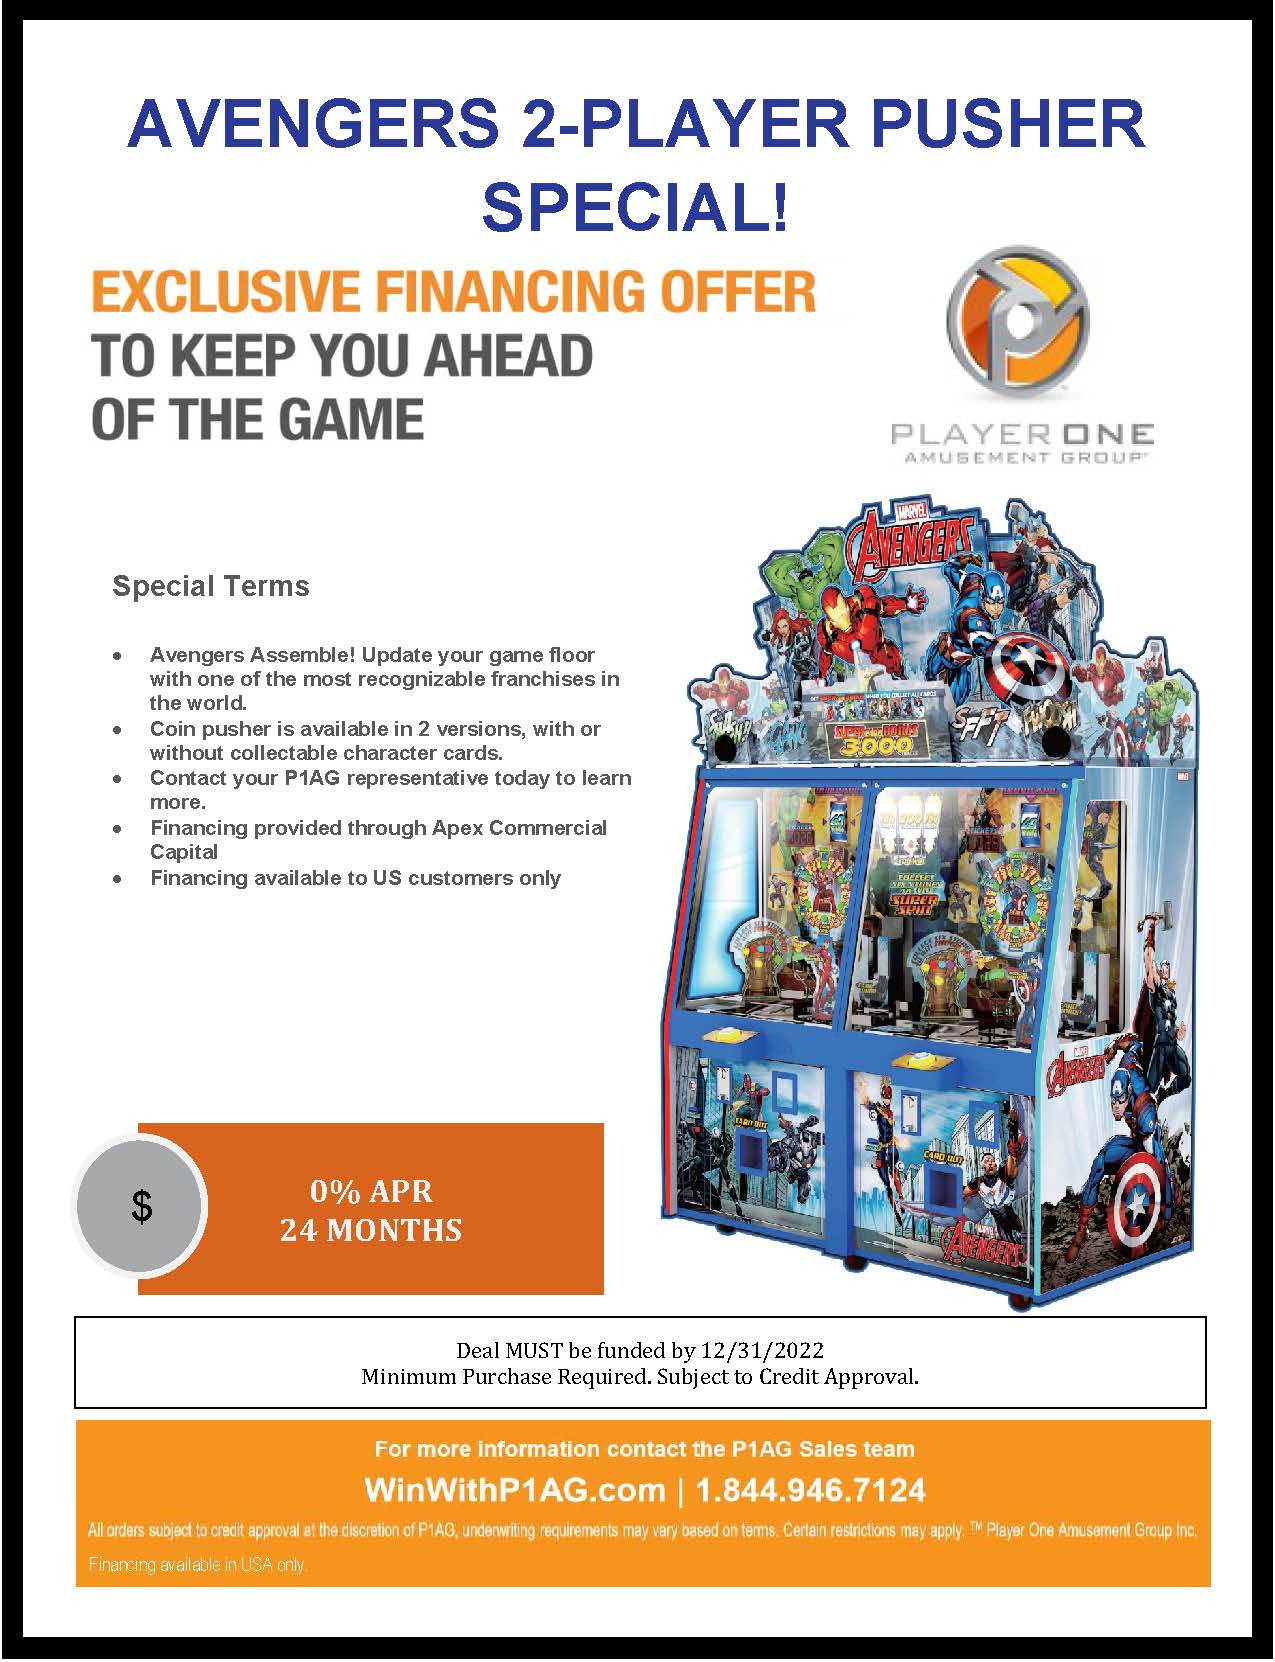 Image of Avengers 2-Player Coin Pusher Financing Special